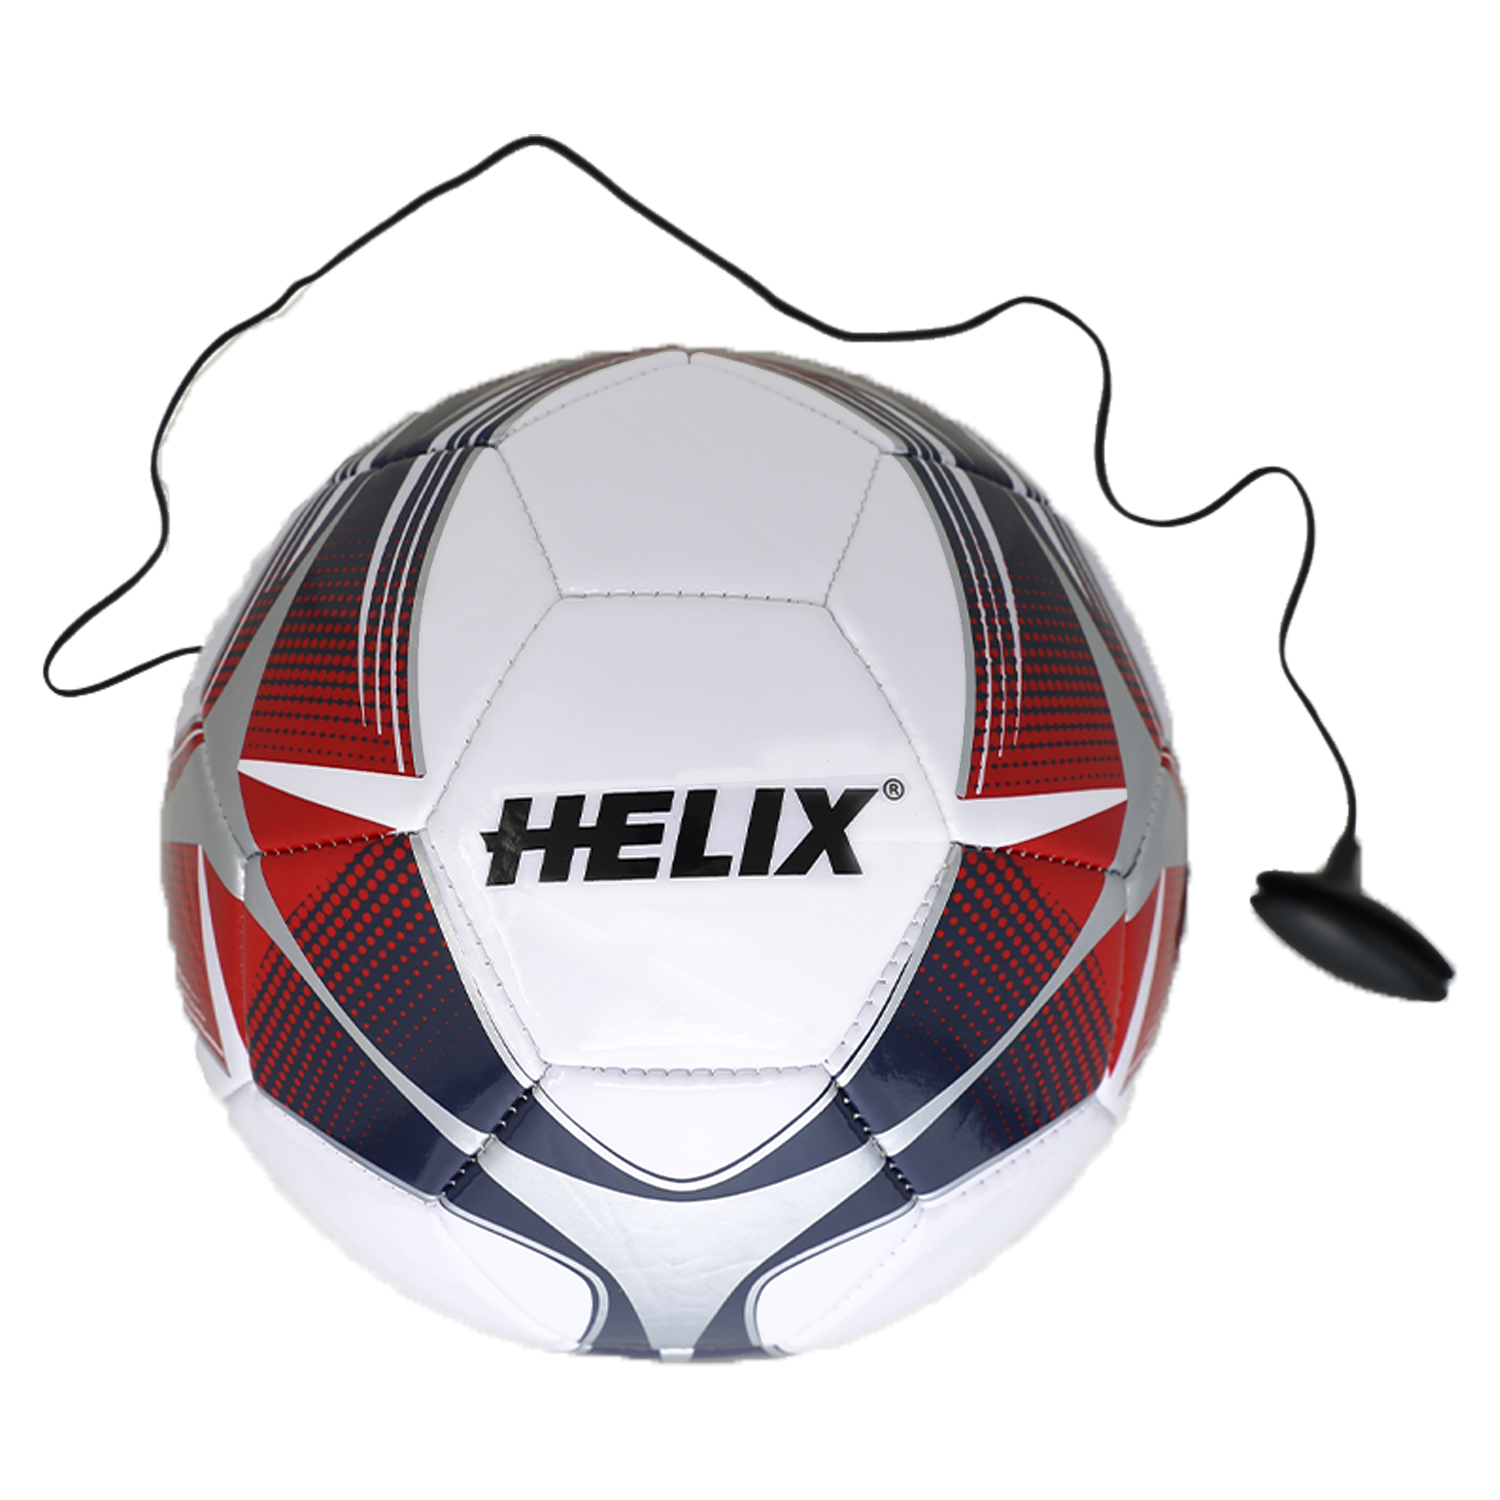 Helix Rope Soccer Training Ball No: 5